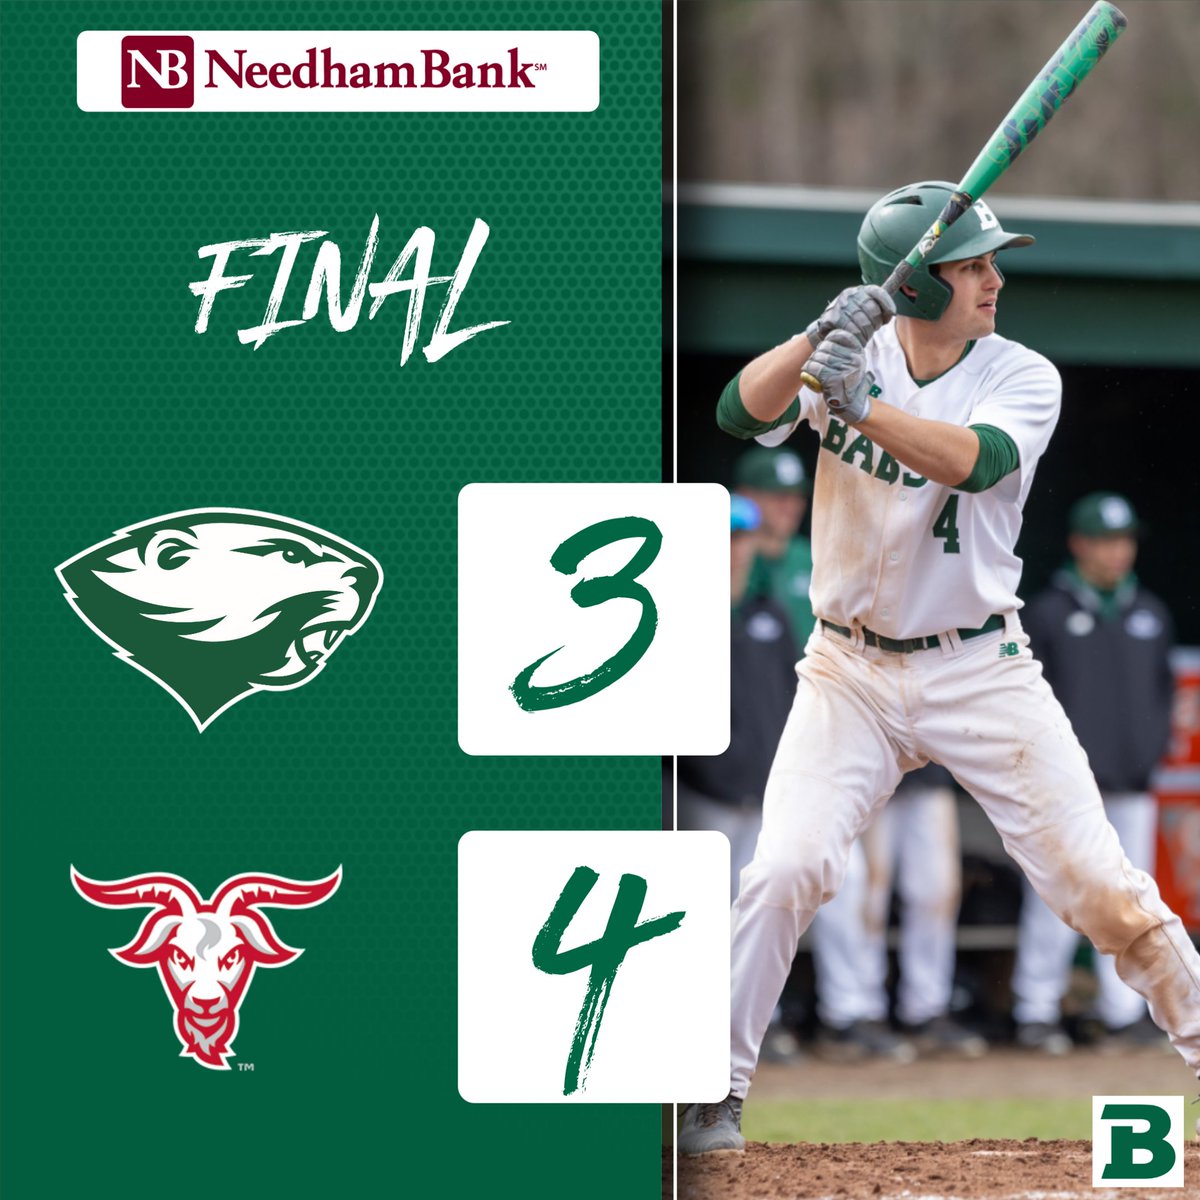 Ike Kiely went 2-for-4 with a double and RBI but @BabsonBaseball's ninth-inning rally came up just short in a 4-3 loss to @WPIAthletics in game one of Sunday's doubleheader. #GoBabo #d3baseball